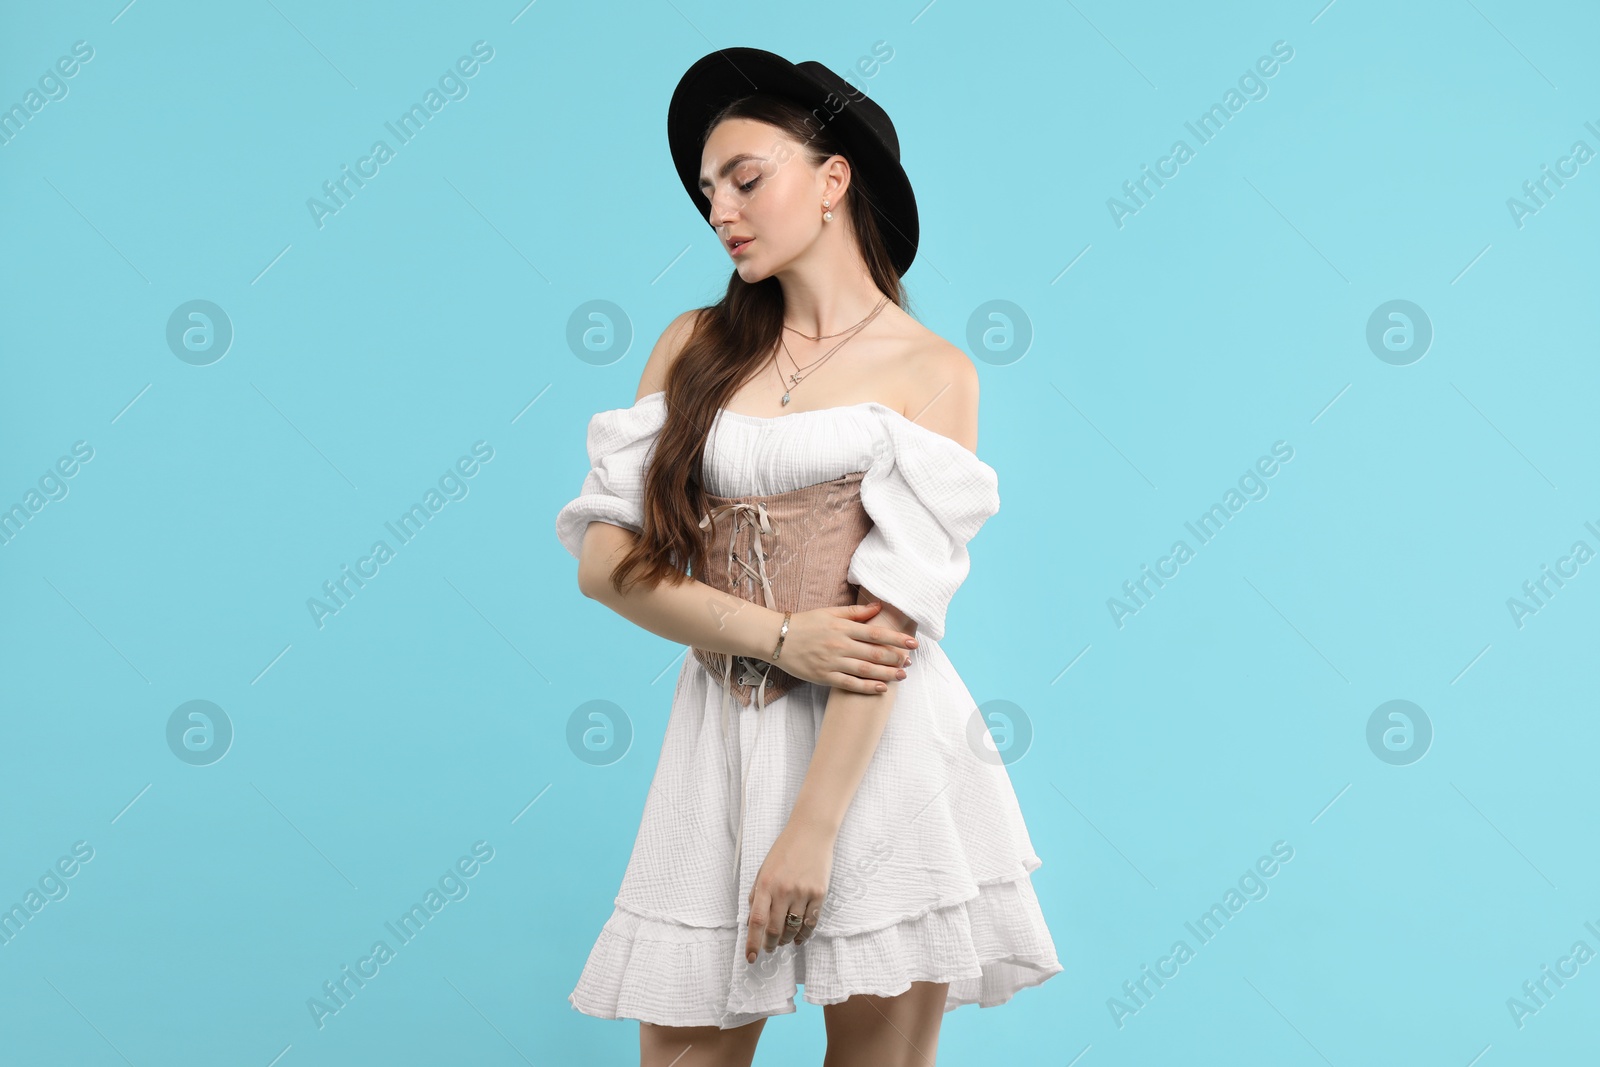 Photo of Beautiful woman in velvet corset and hat posing on light blue background